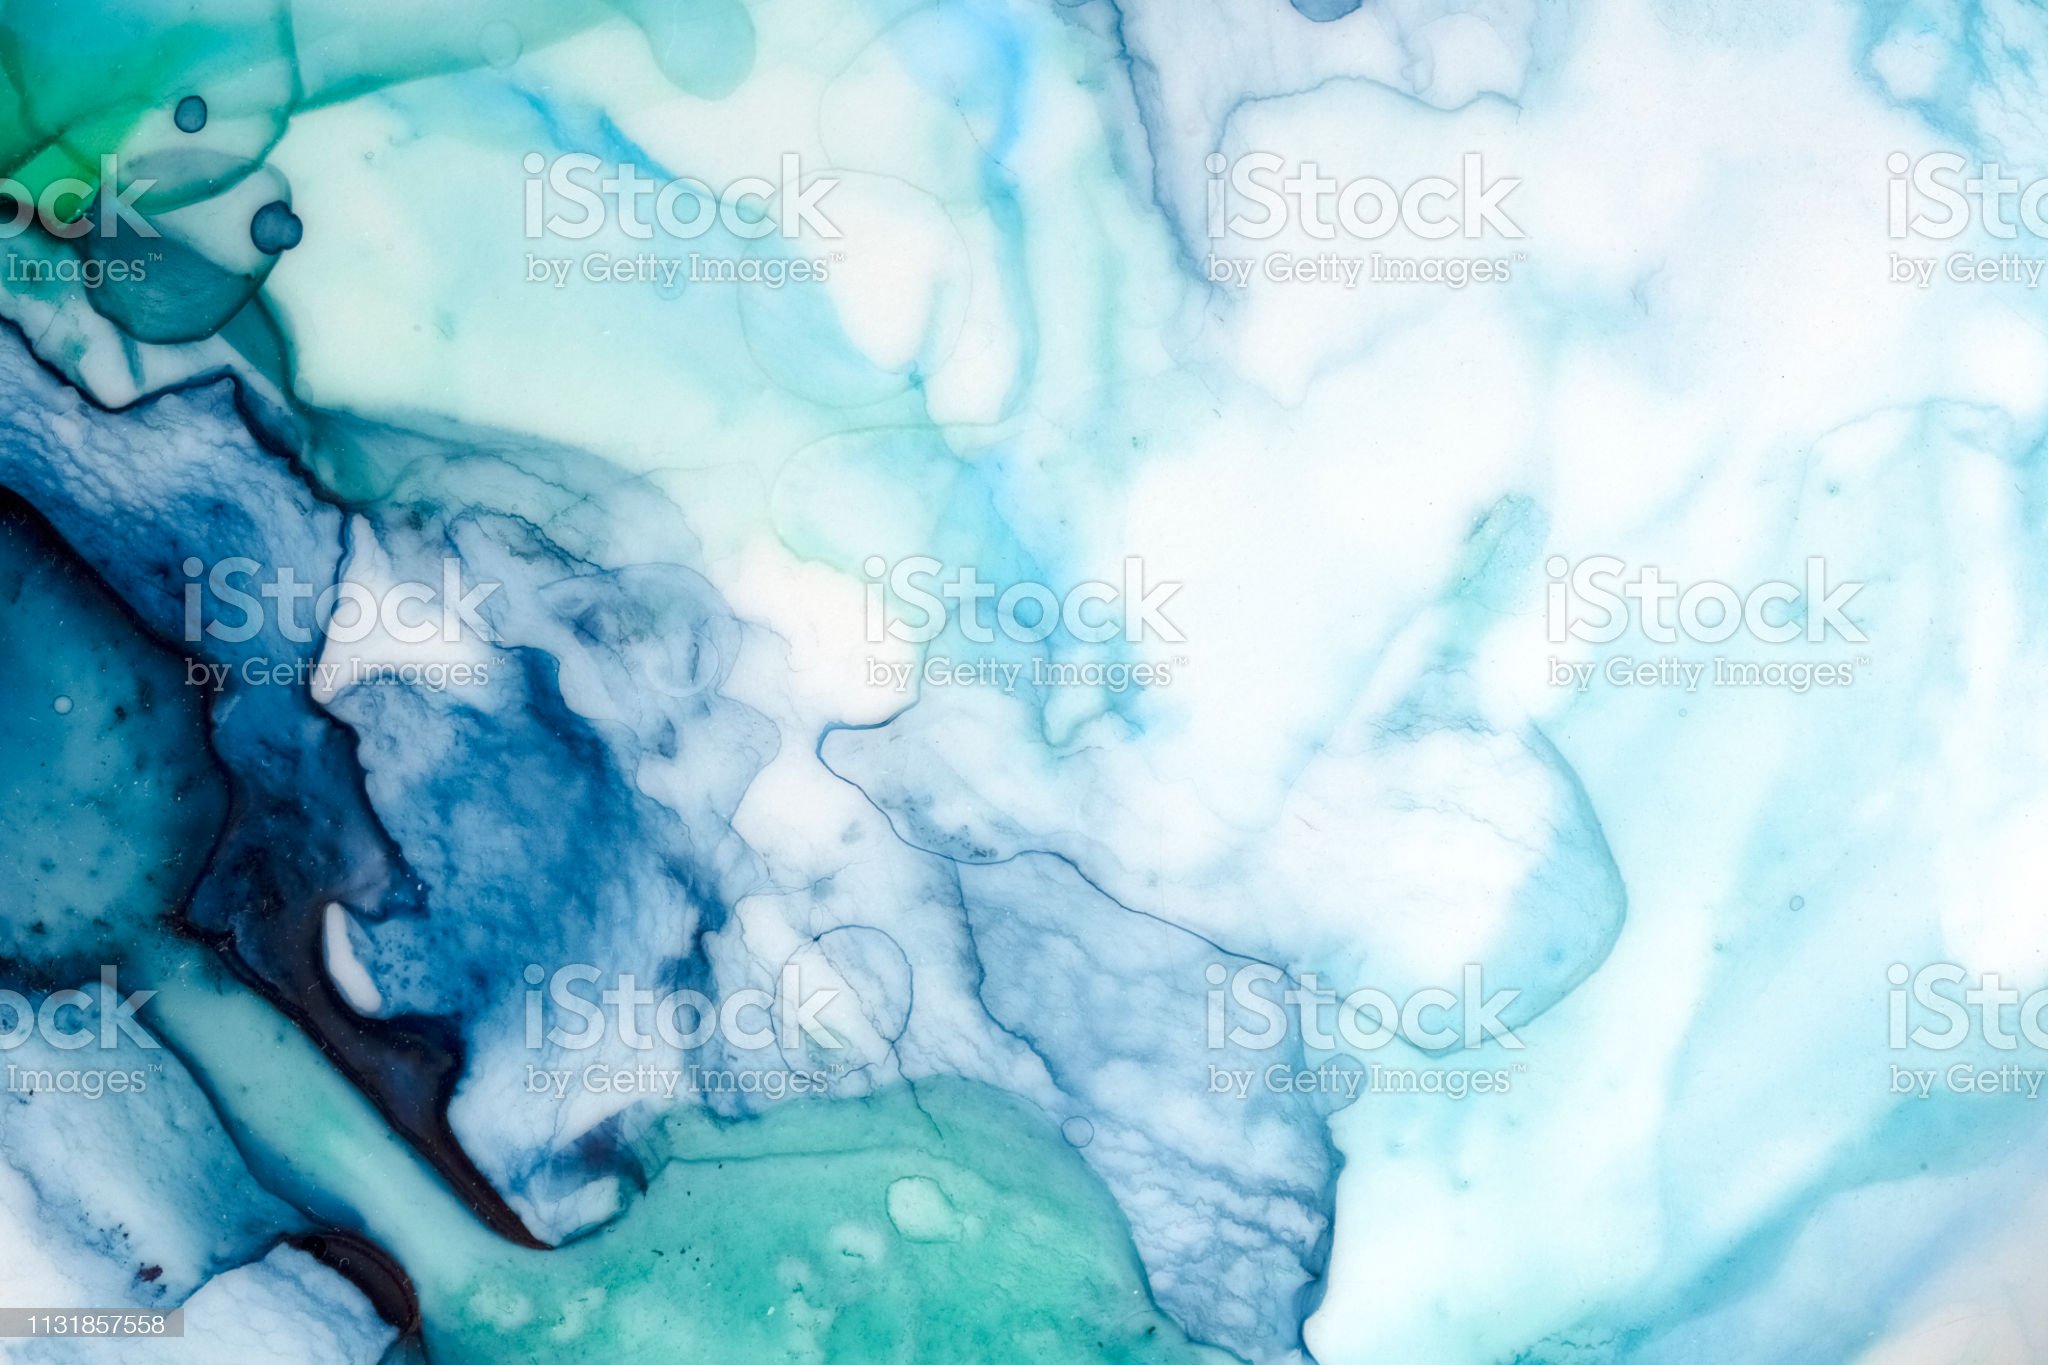 Abstract Watercolor Wavy Painting With Beautiful Seaside Colour Tones Artistic Details Closeup Modern Contemporary Art On White Backdrop For Wallpaper Flyers Layouts Posters Cards Image Now